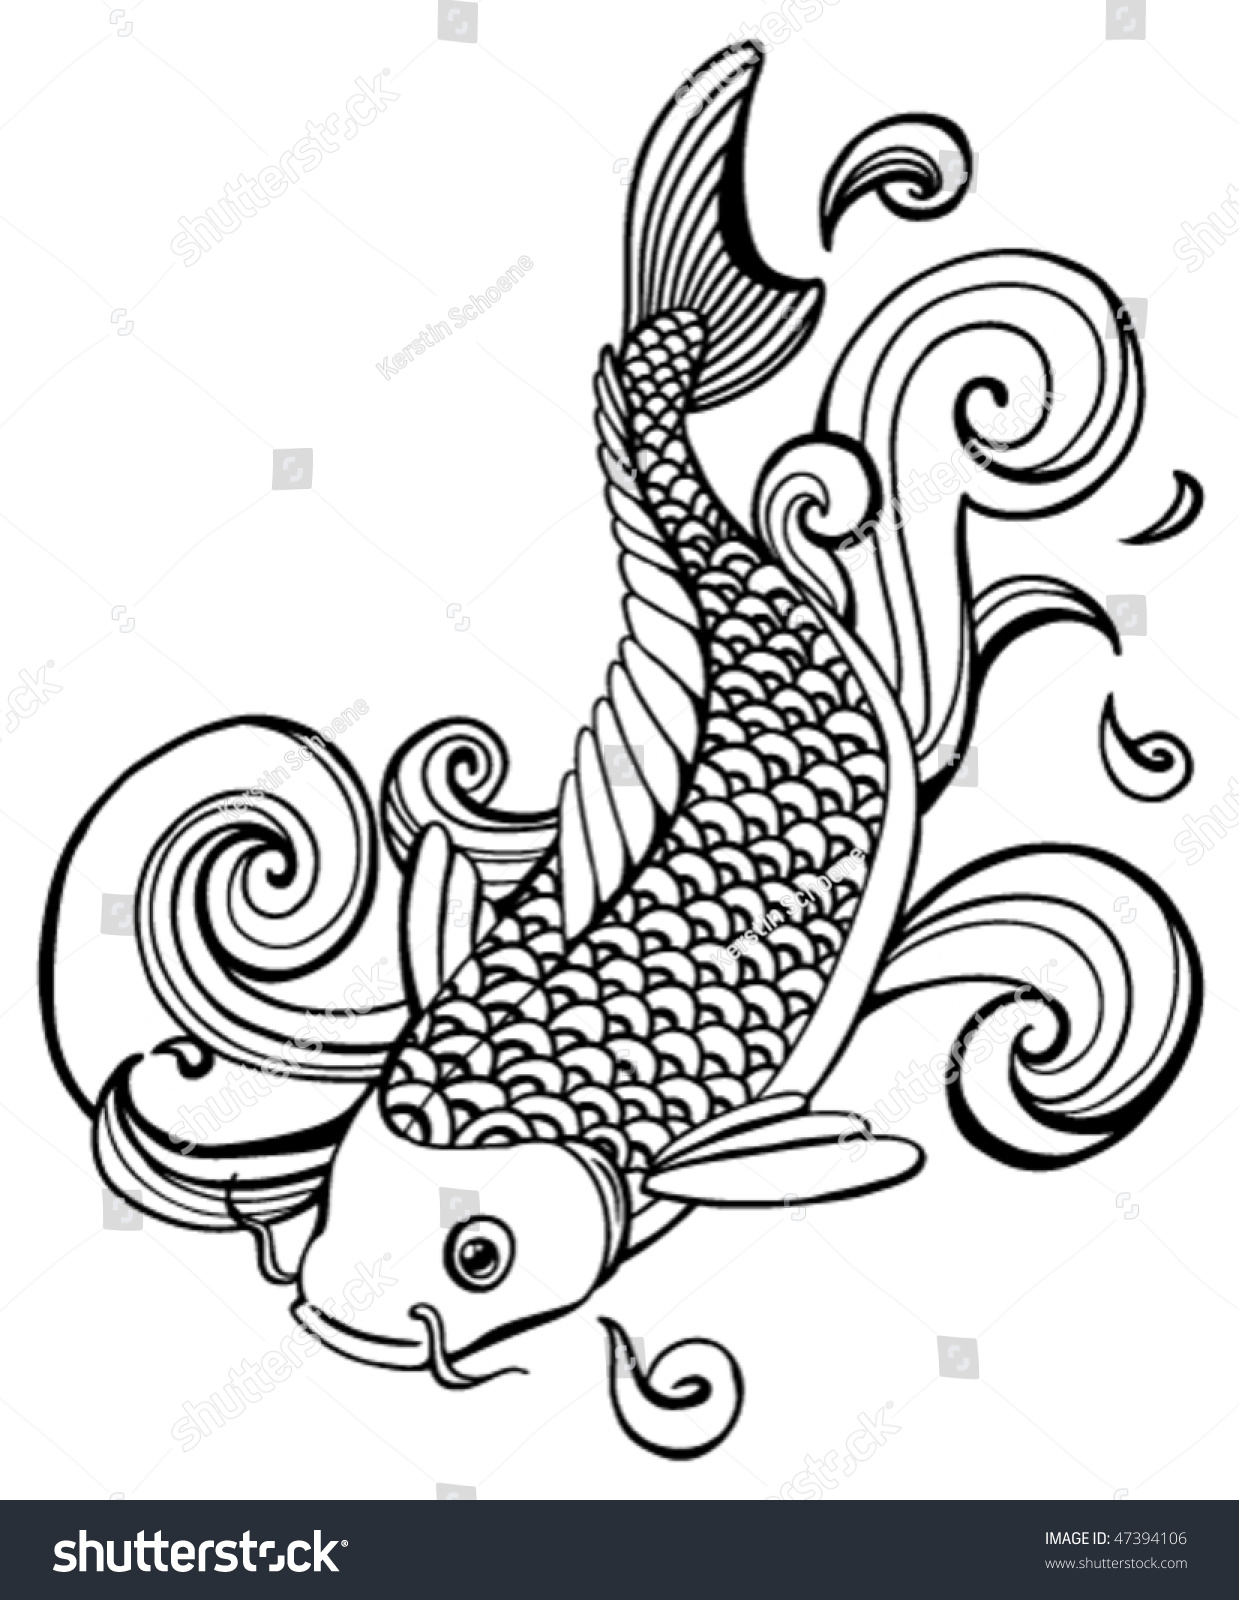 Free Koi Svg - Koi Fish Cuttable Design : Some koi svg may be available